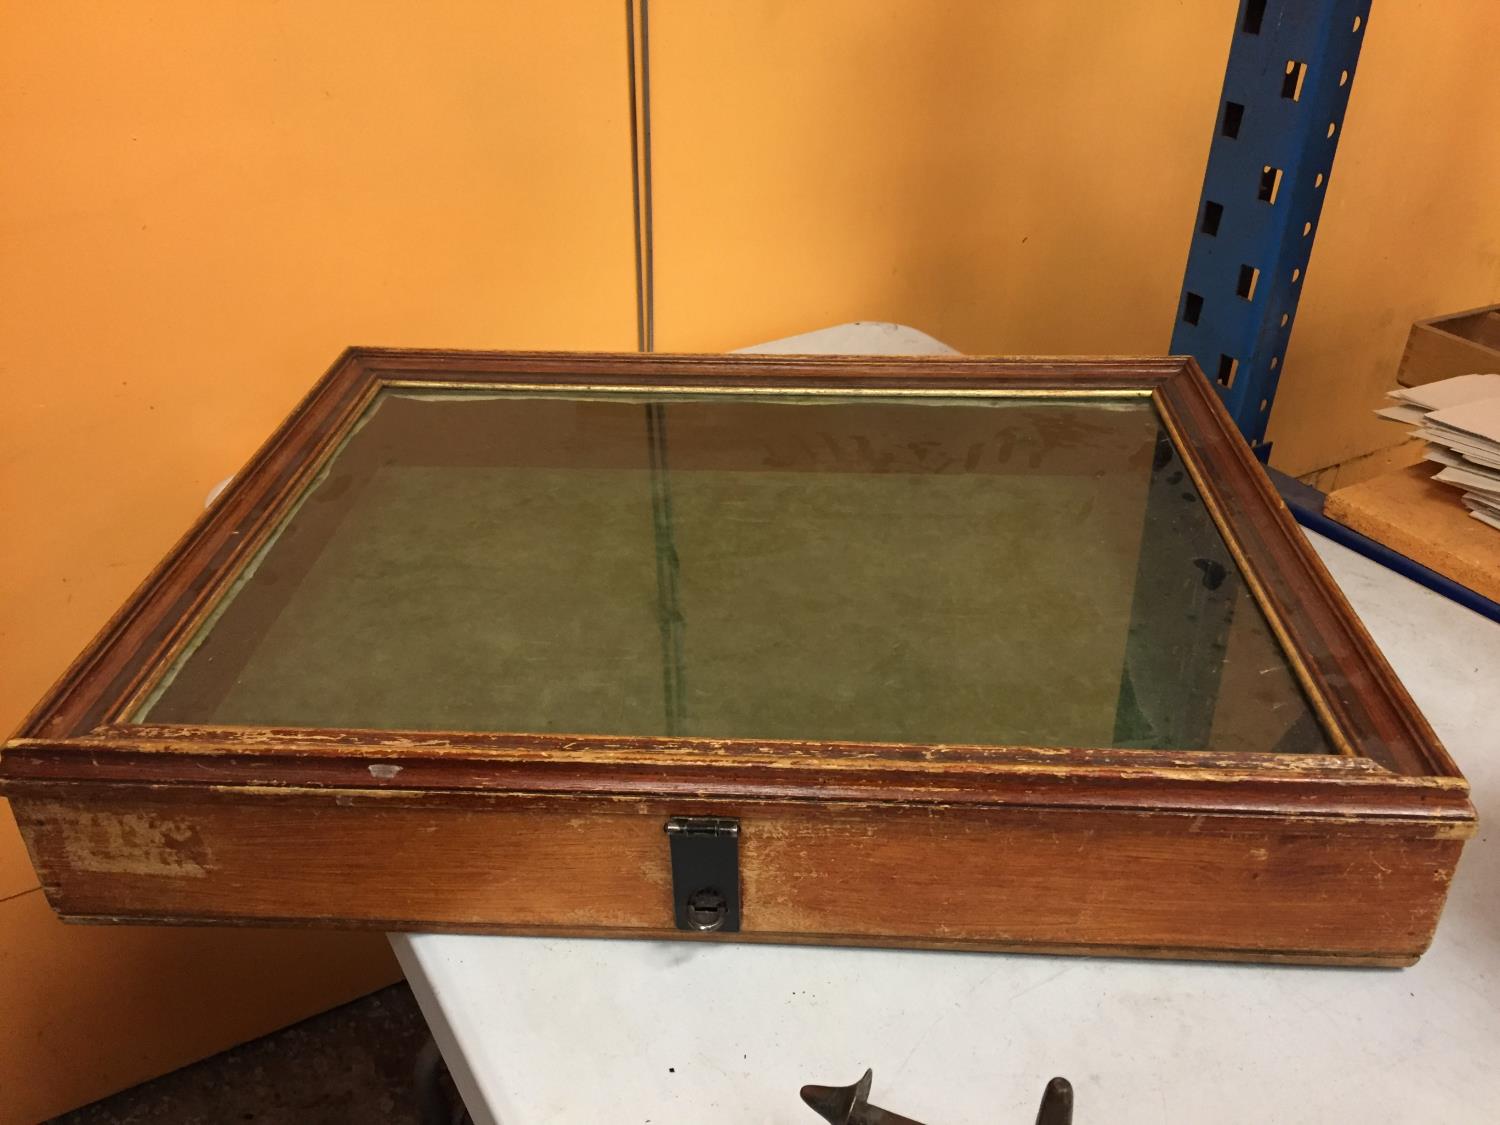 A LARGE GLASS TOPPED WOODEN DISPLAY BOX 68CM X 51CM